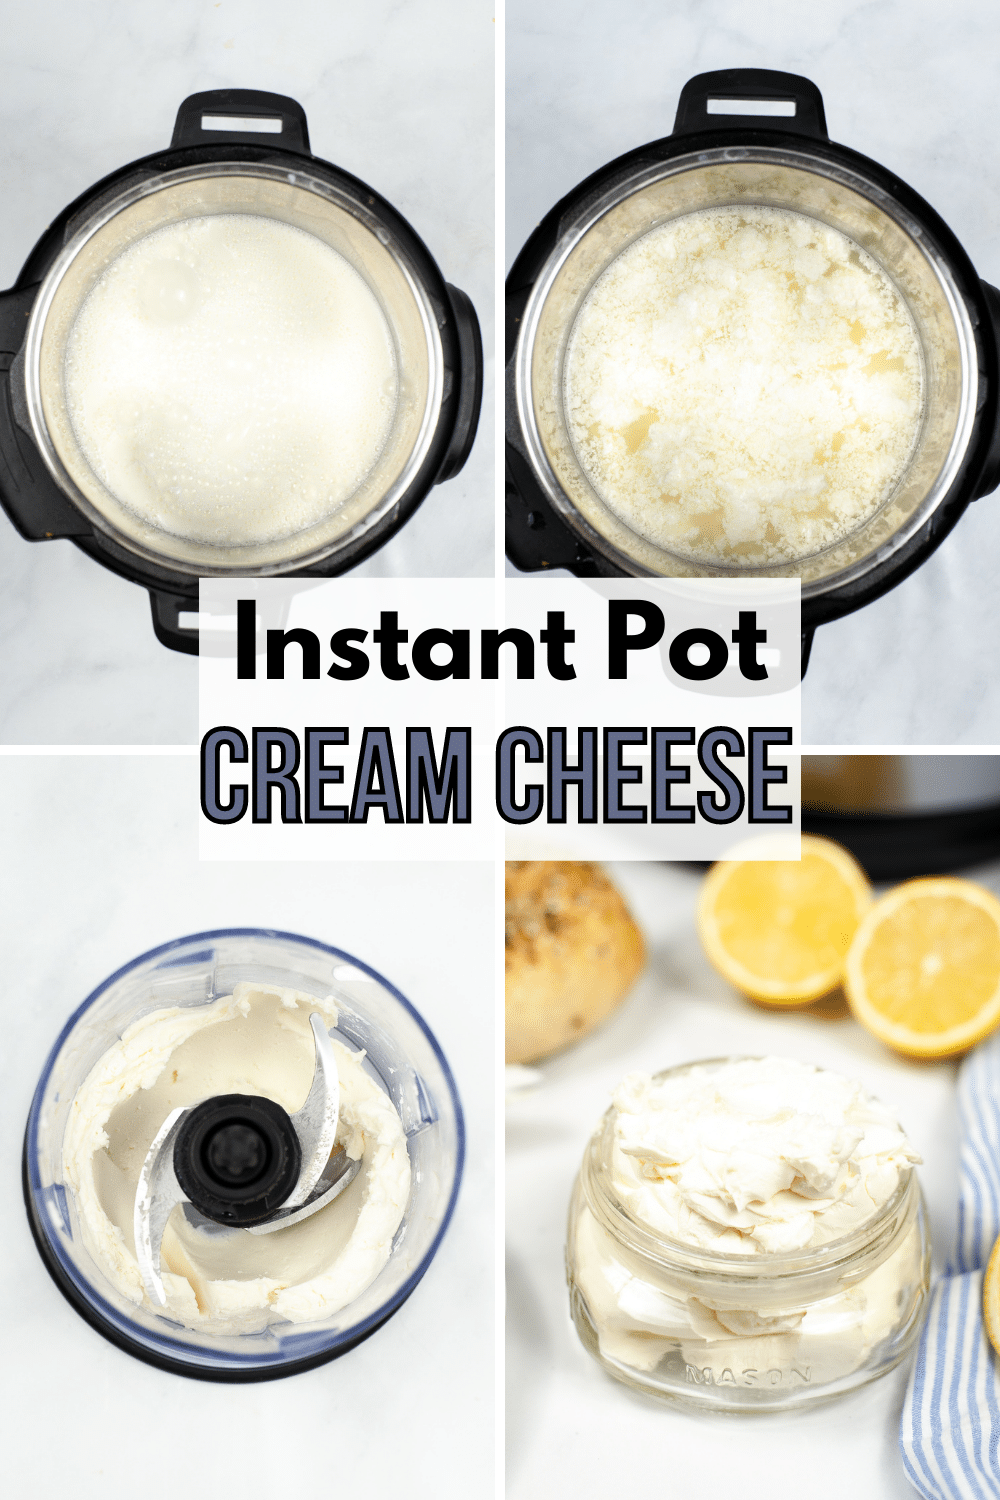 If you’re looking for an easy way to make cream cheese, then this Instant Pot Cream Cheese is the recipe for you! #instantpot #pressurecooker #creamcheese #recipe via @wondermomwannab